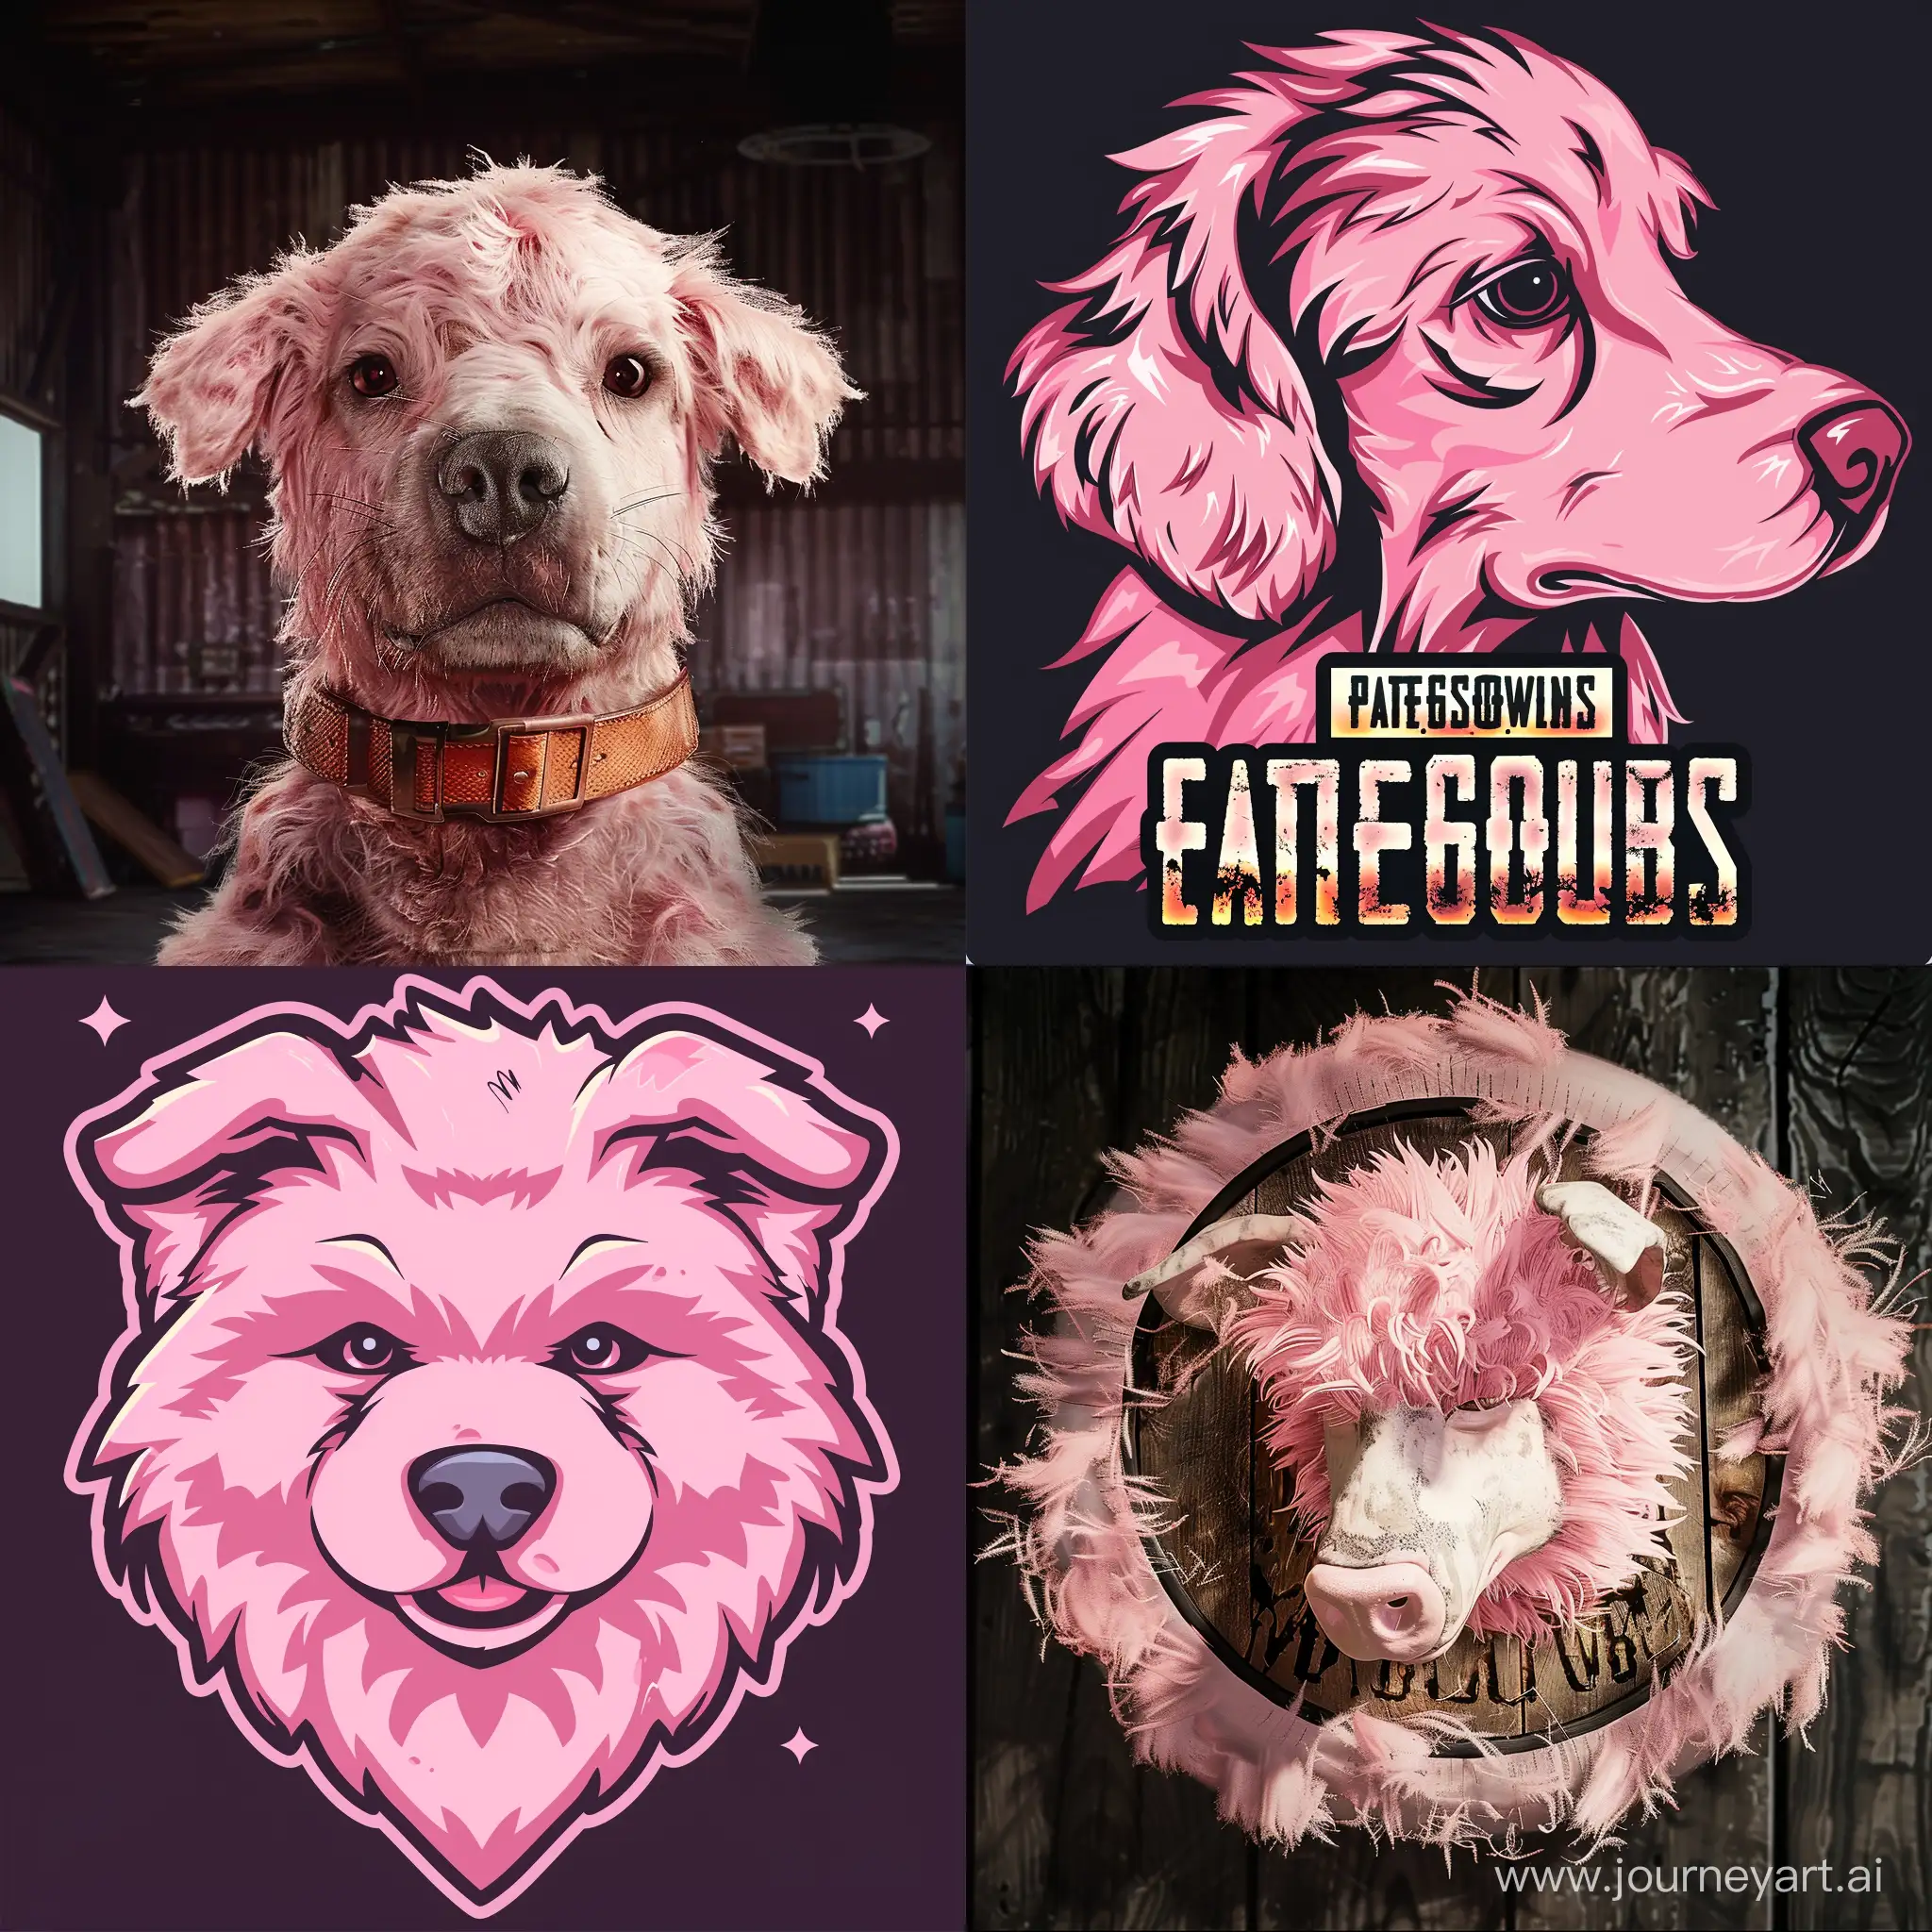 Pink-Furry-Dog-and-PUBG-Mobile-Logo-Playful-Companion-in-the-Milk-ShowGame